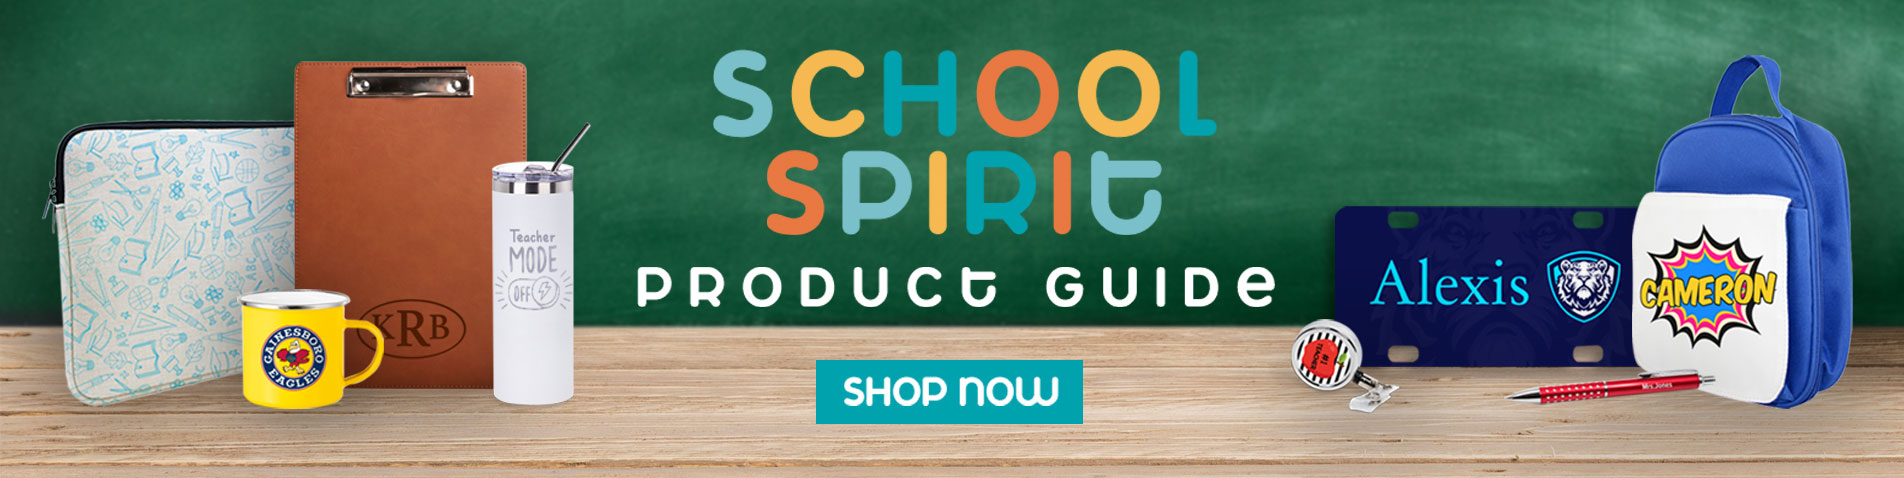 School spirit product guide banner with variety of items to personalize with school spirit insignias